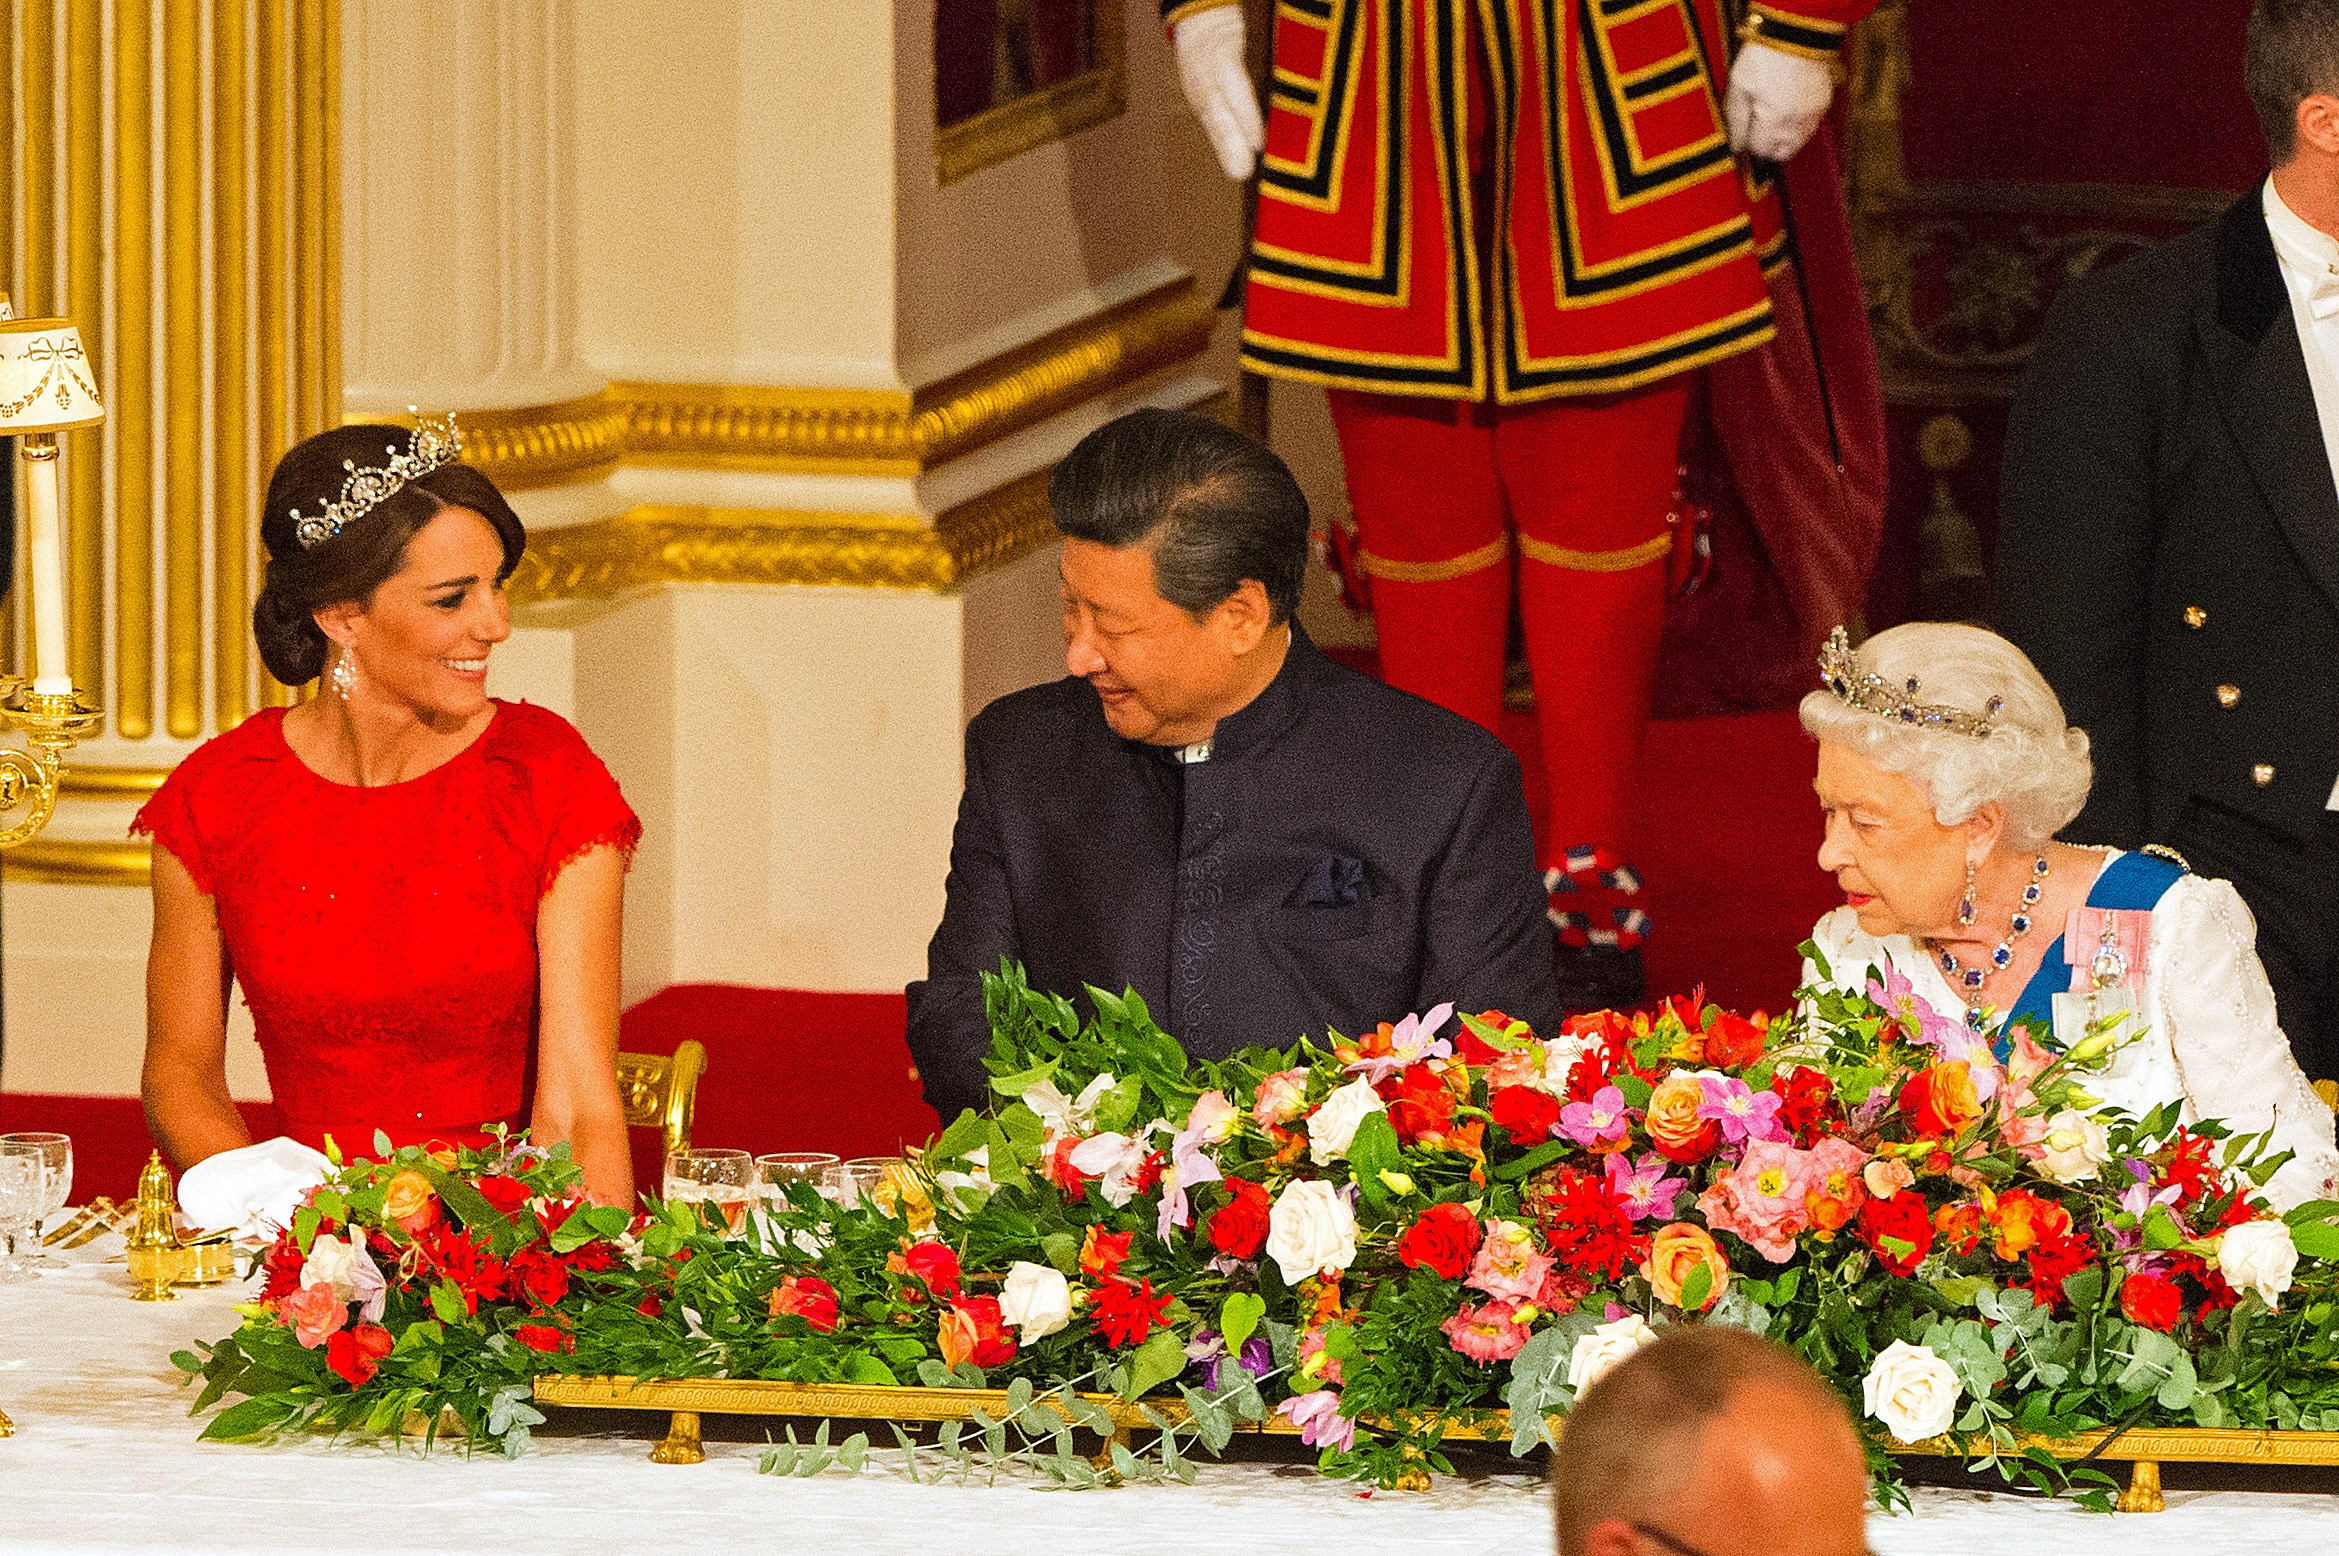 Chinese President Xi Jinping (C) sits between Britain's Catherine, Duchess of Cambridge, (L) and Britain's Queen Elizabeth II during State Banquet at Buckingham Palace in London, on October 20, 2015, on the first official day of Xi's state visit. (DOMINIC LIPINSKI—AFP/Getty Images)